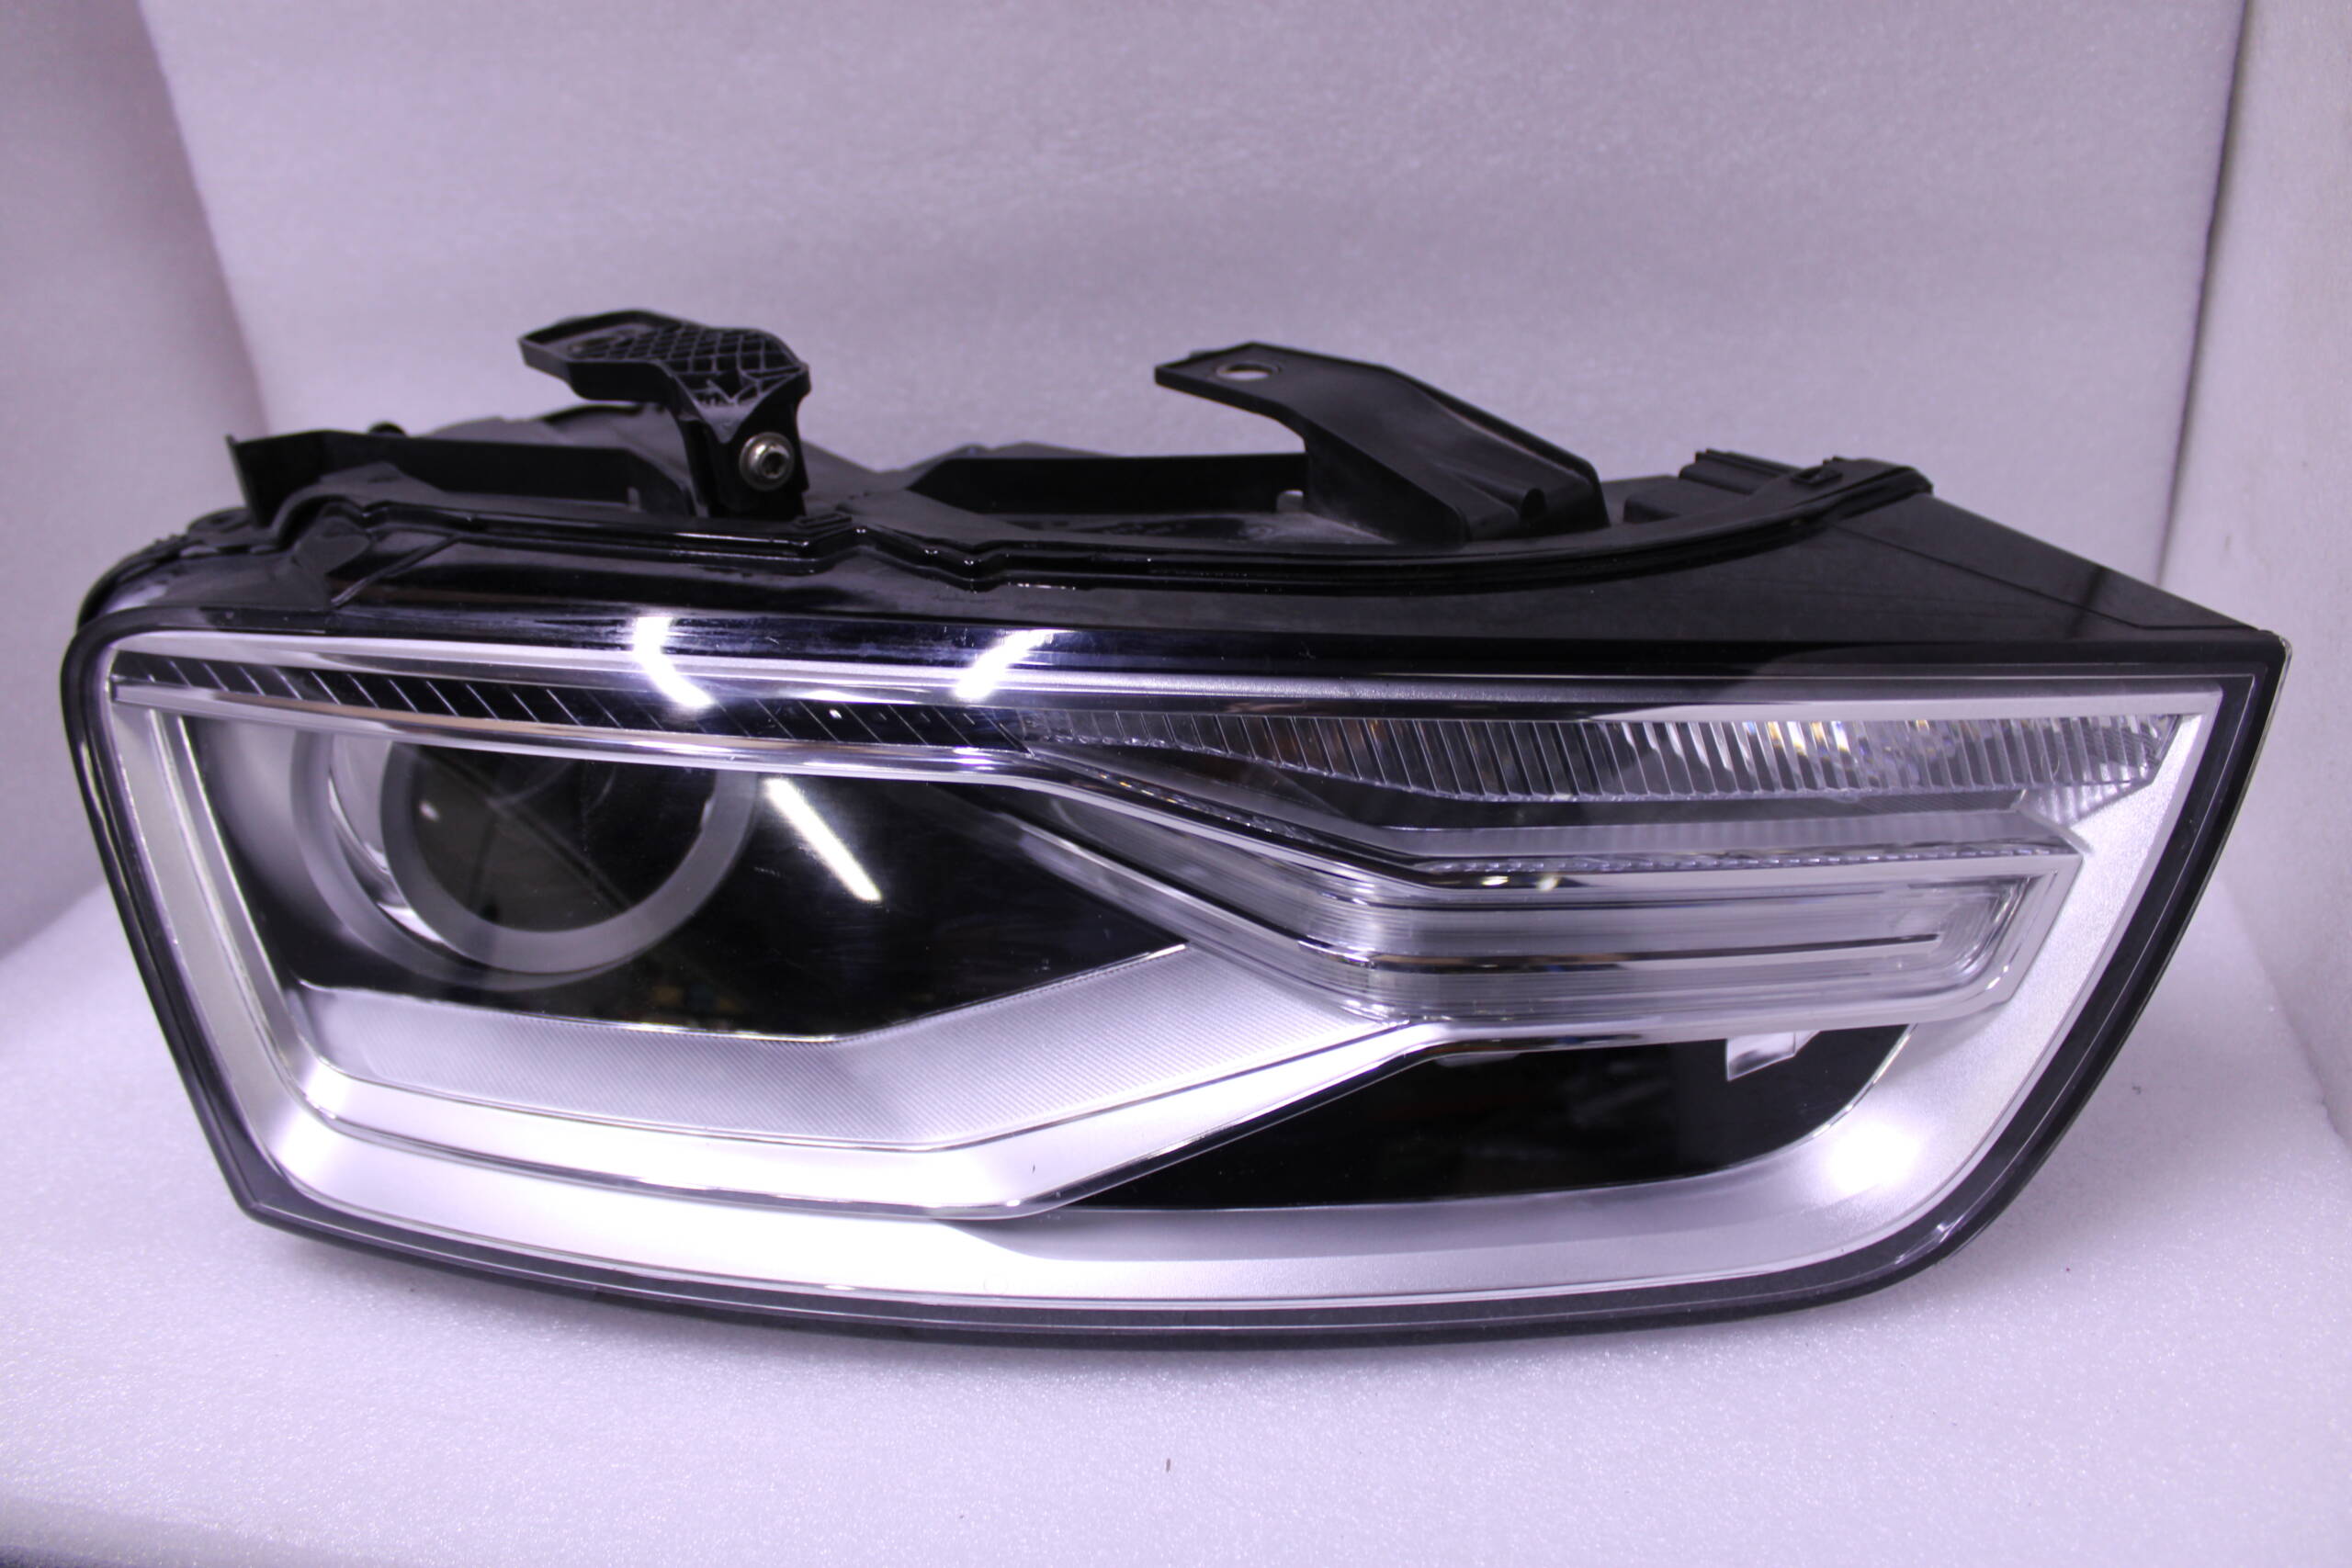 AUDI Q3 HEAD LIGHT FOR GAS DISCHARGE LAMP RIGHT 8UD941006B